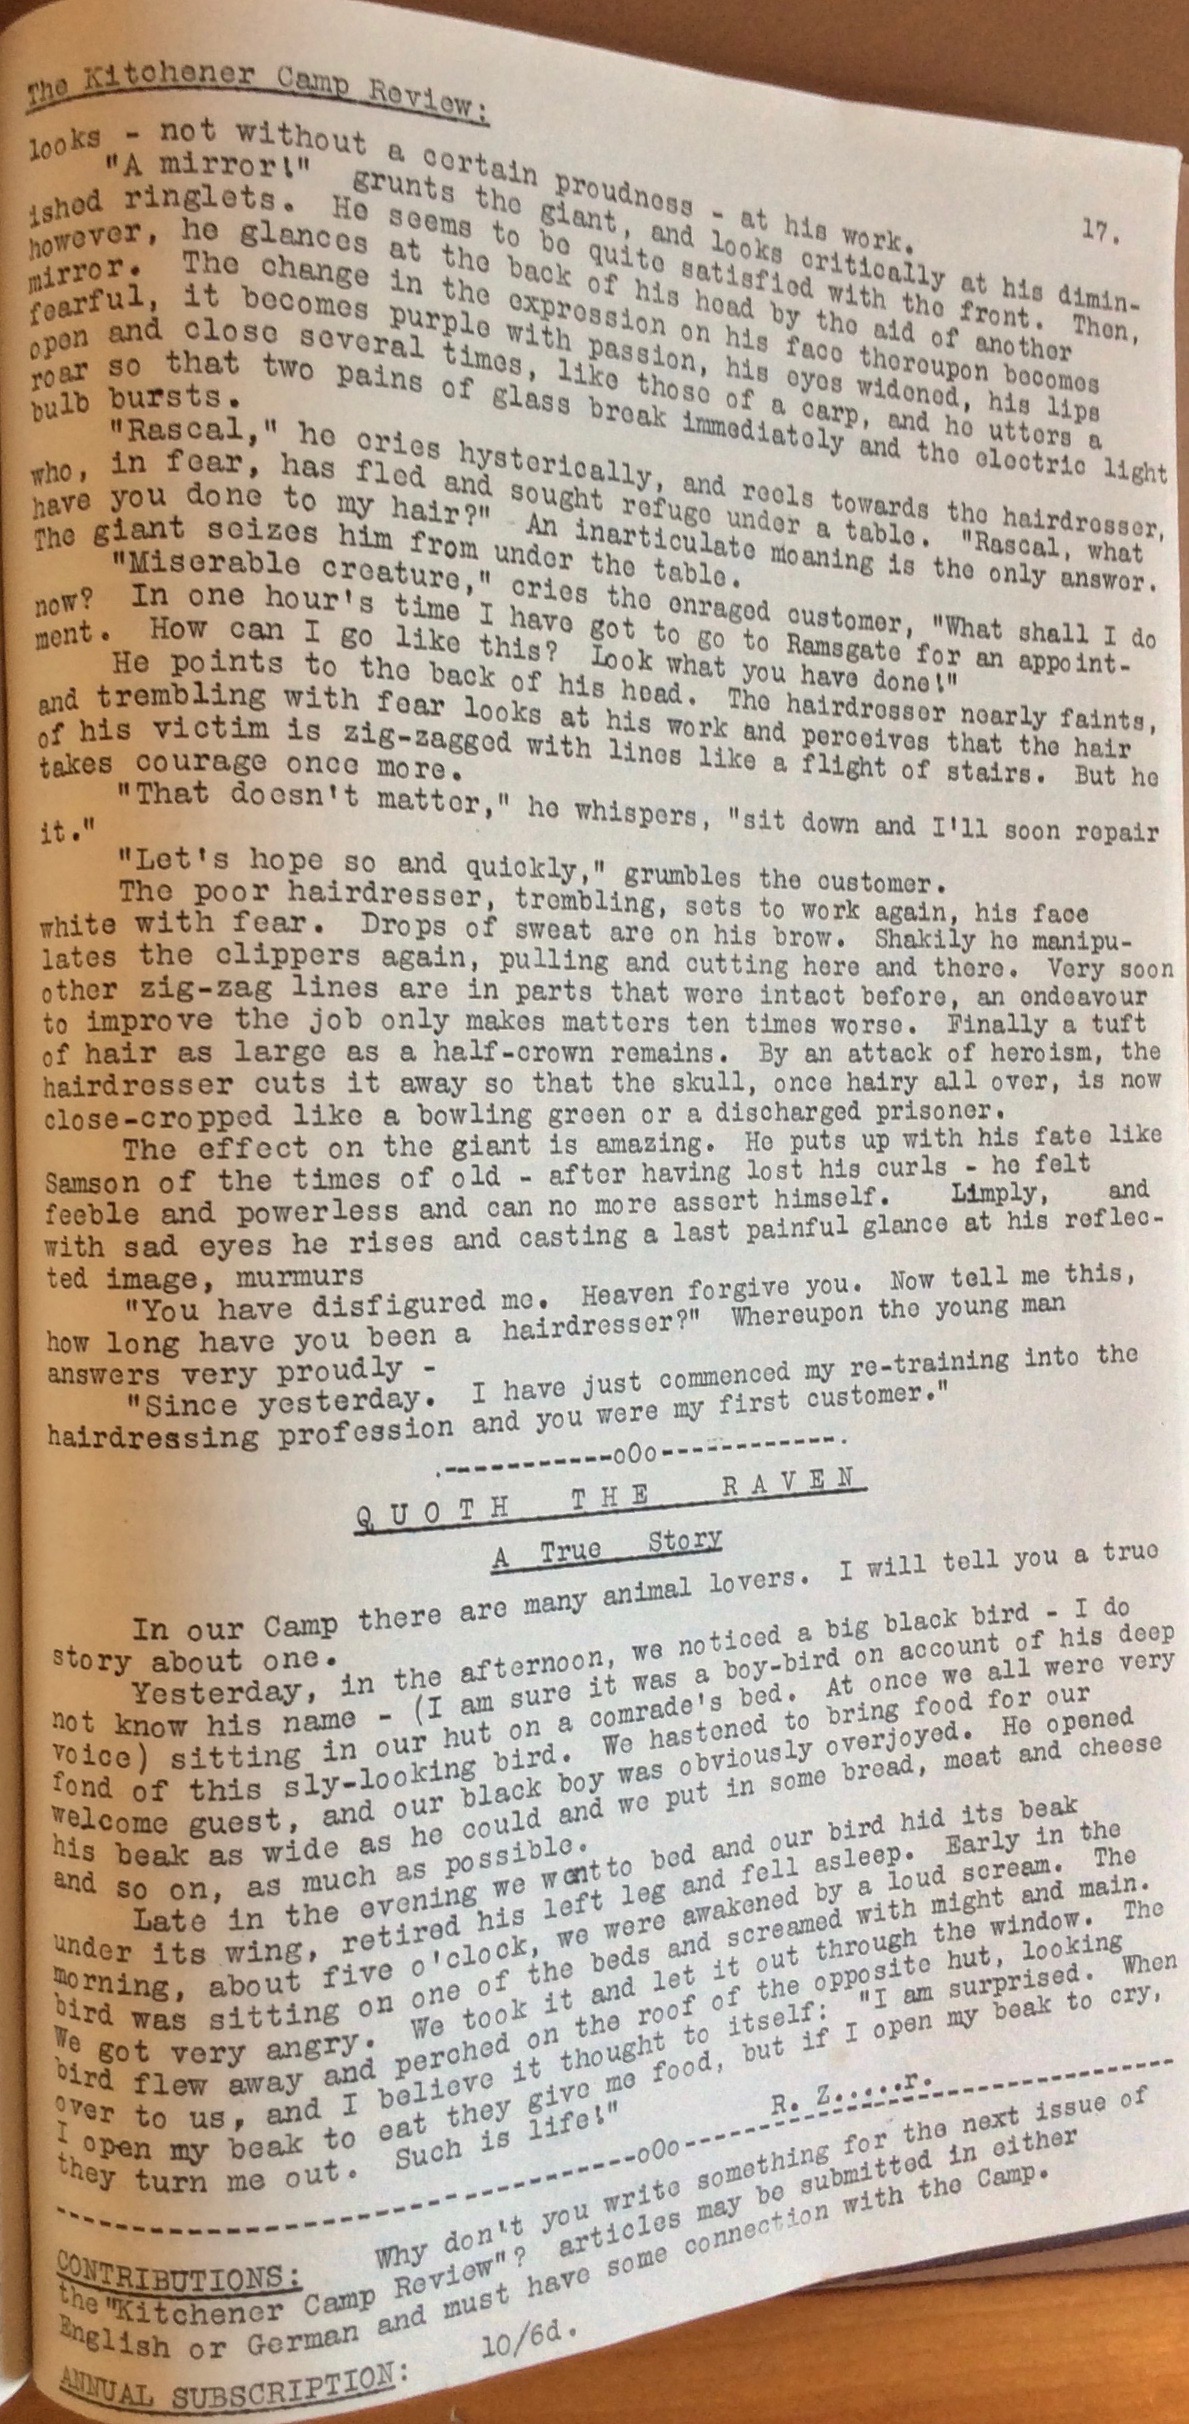 The Kitchener Camp Review, August 1939, Kitchen, page 17